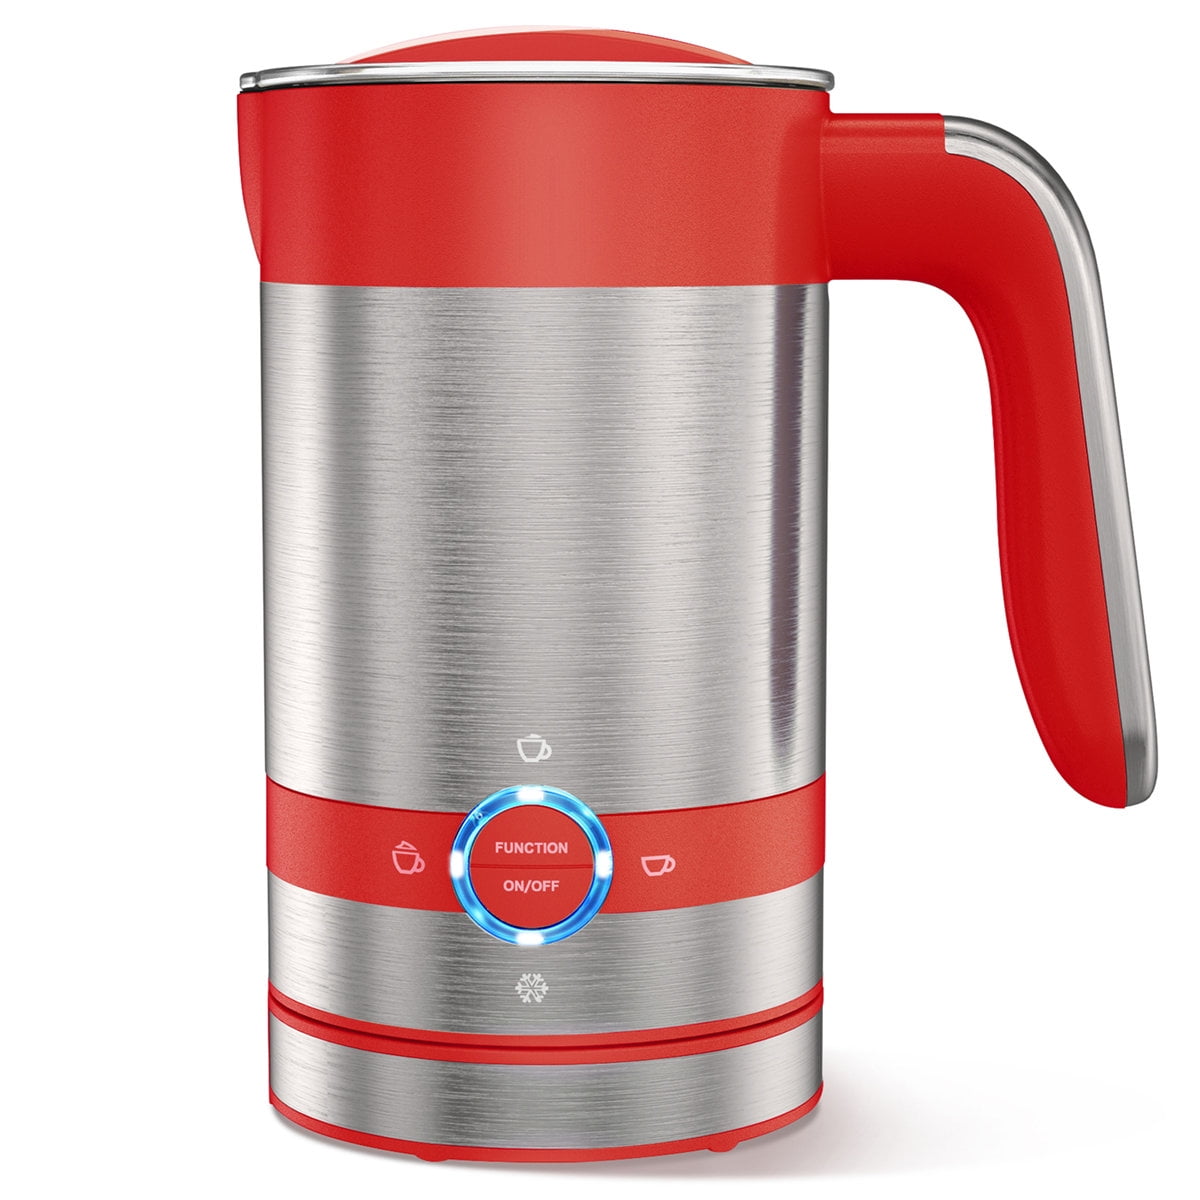 Delm Milk Frother Electric USB Stainless Steel Accessory (Red)